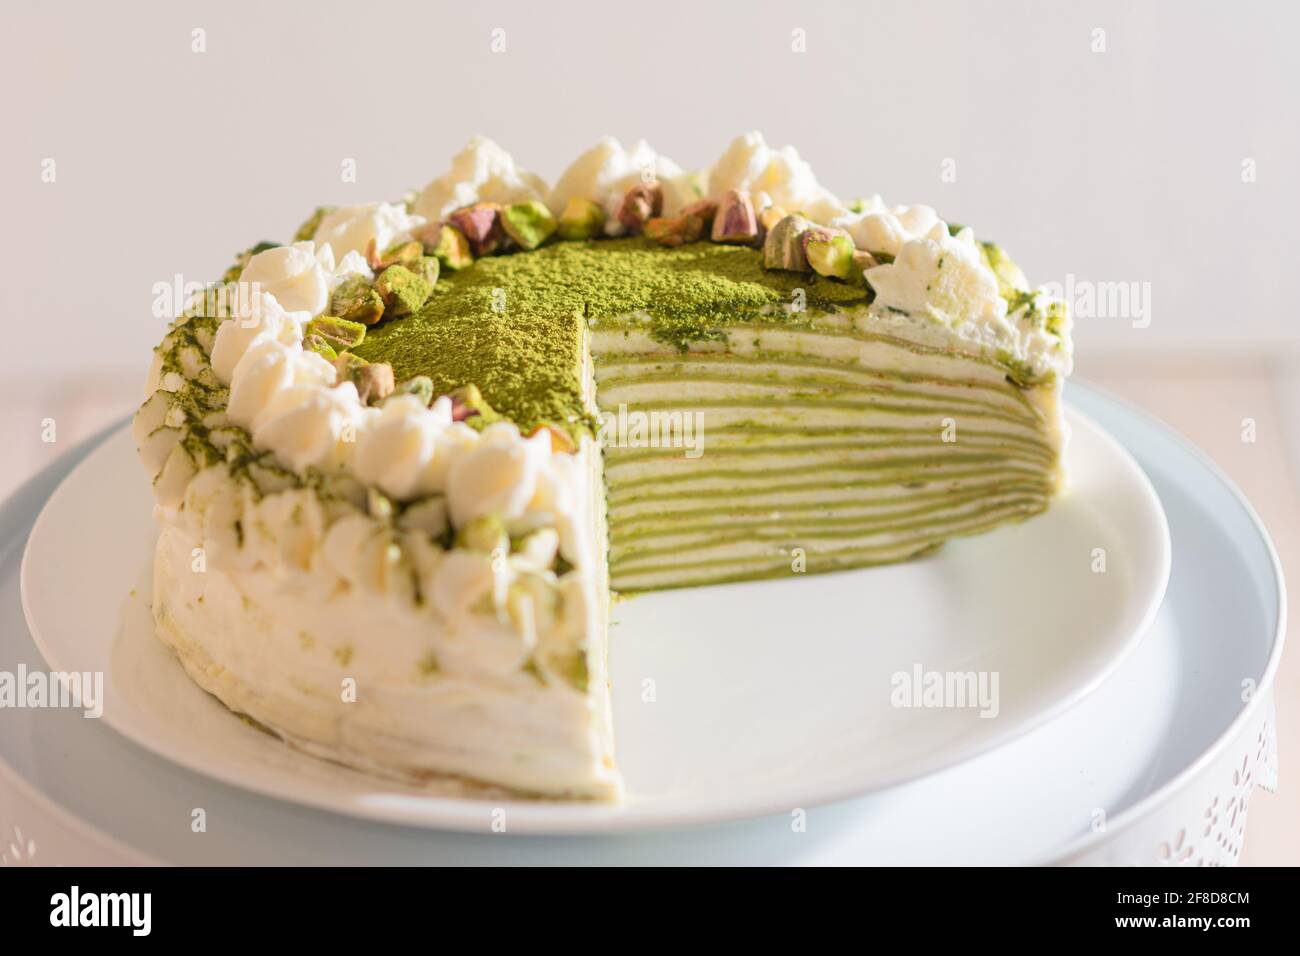 Matcha Mille Crepe Cake On A Plate Stock Photo